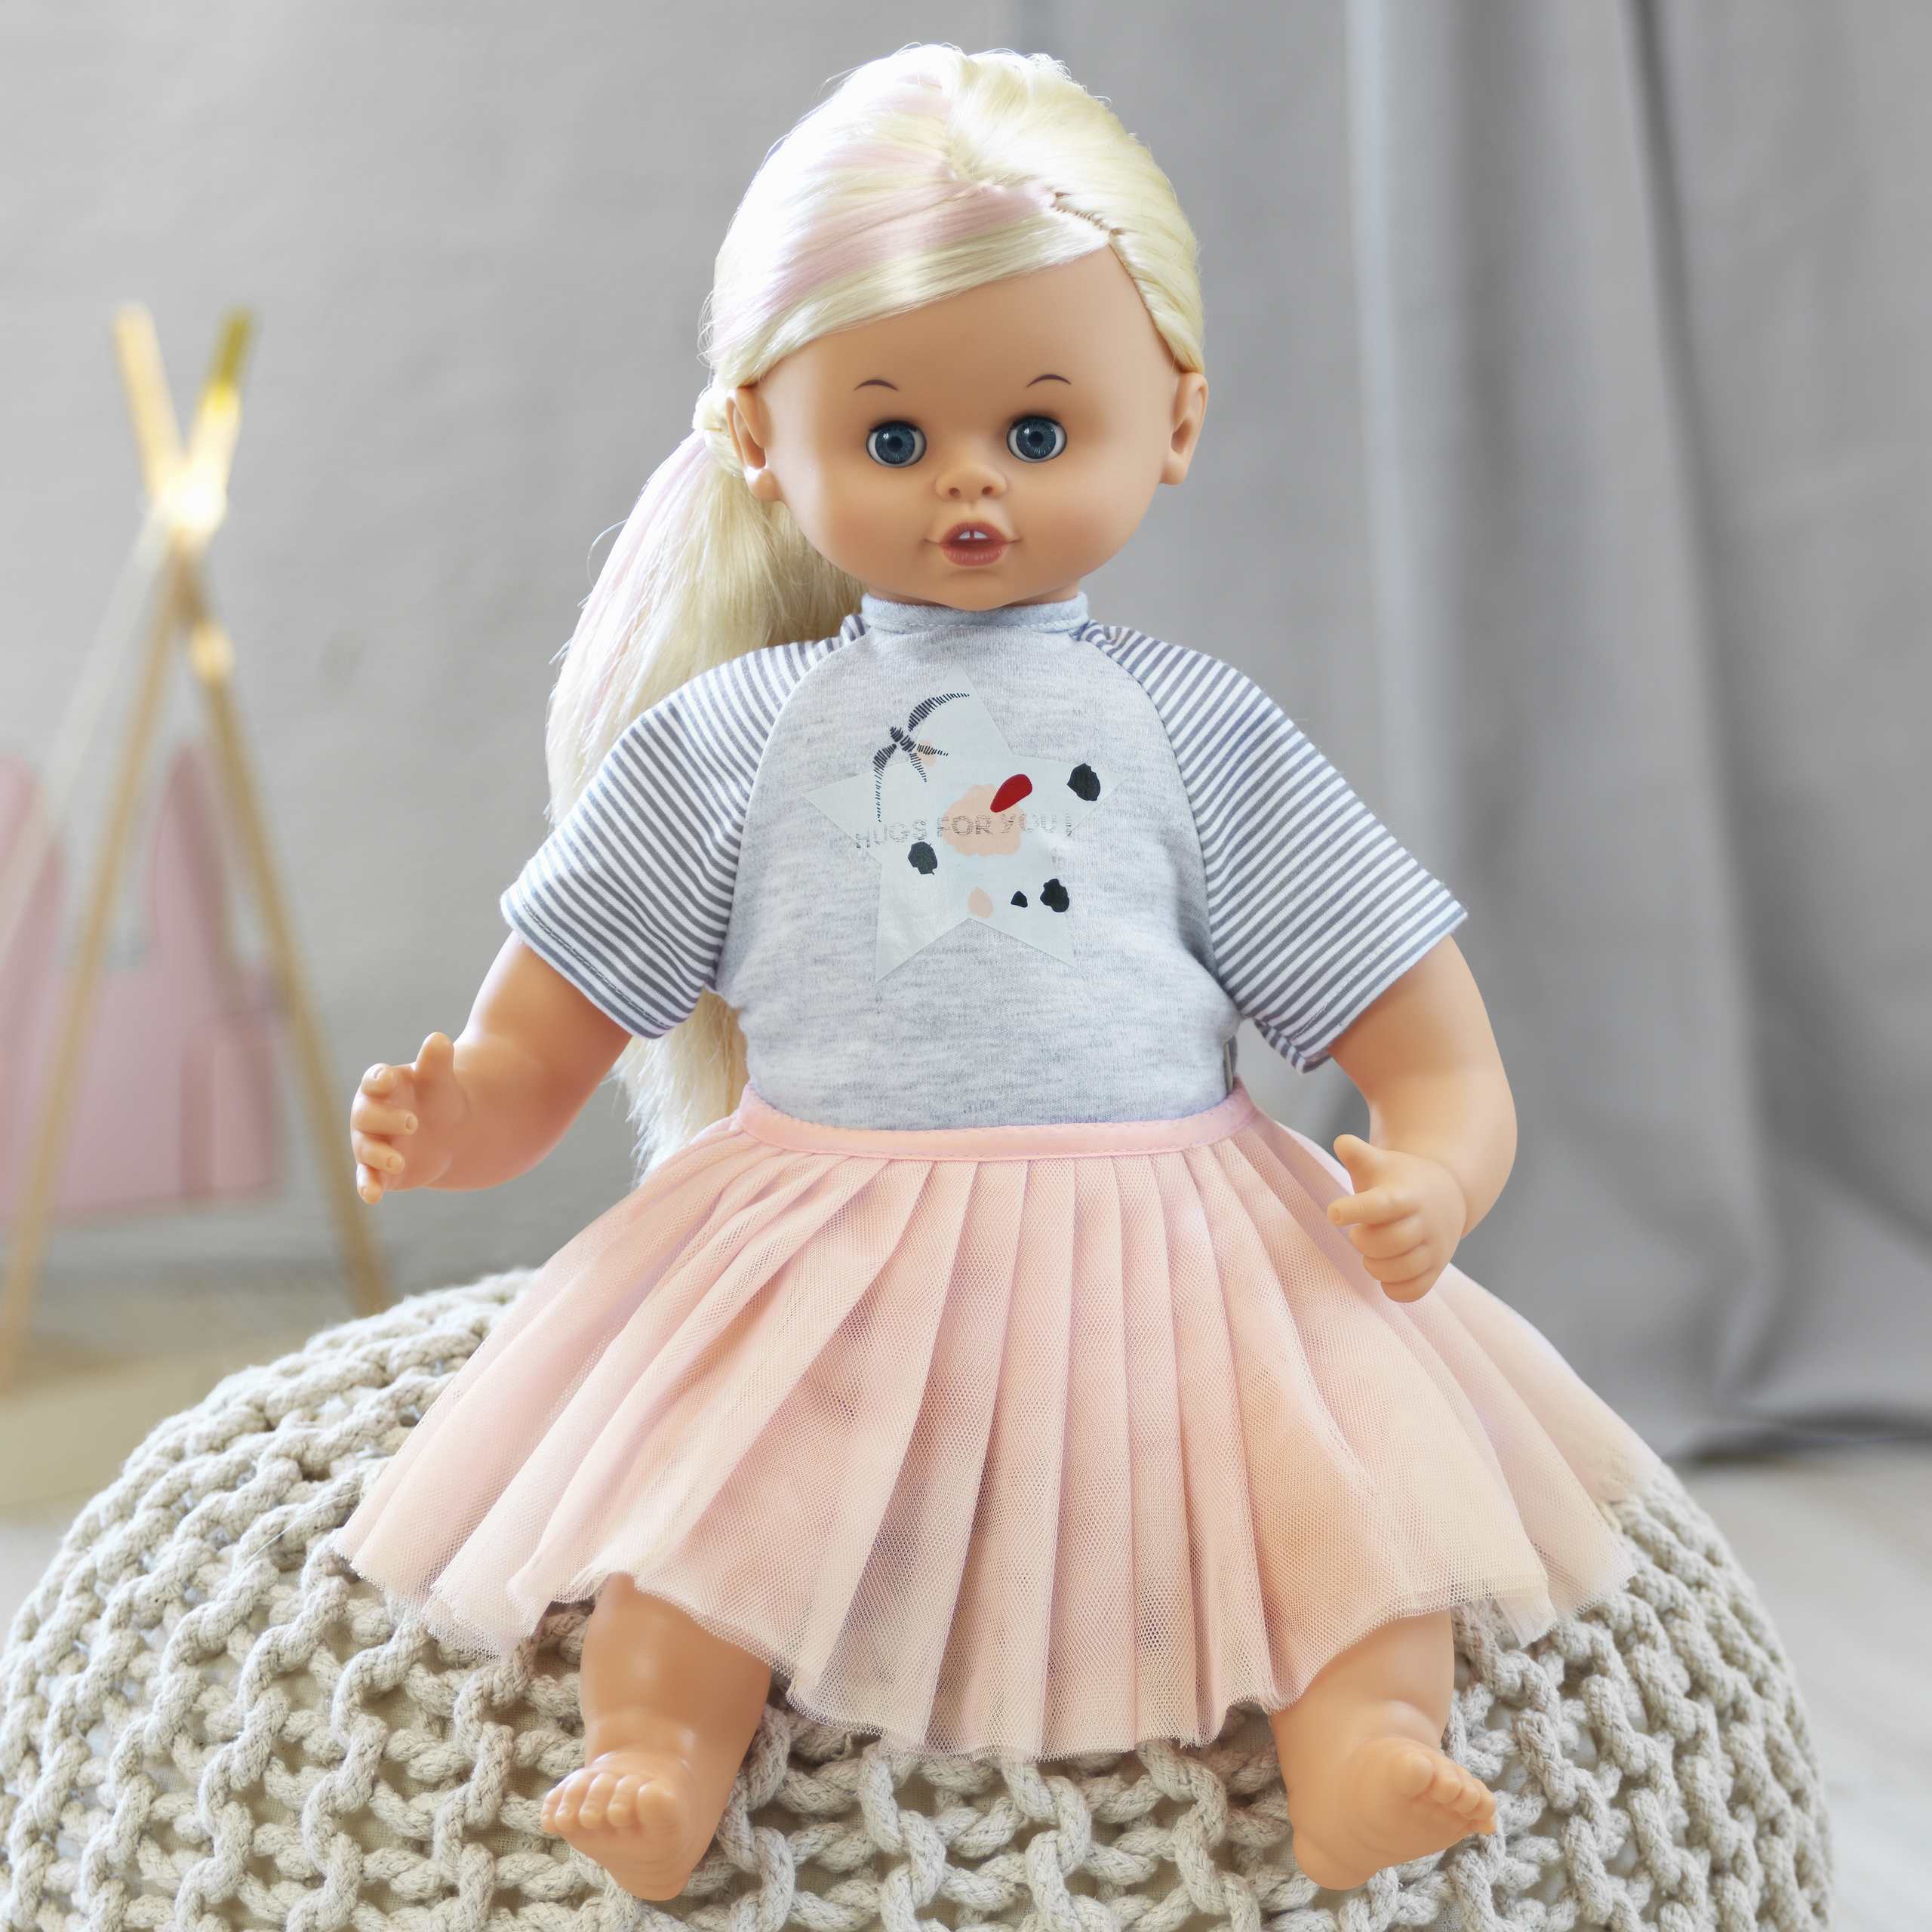 Doll clothes lundby	doll clothes tulle skirt 45 cm